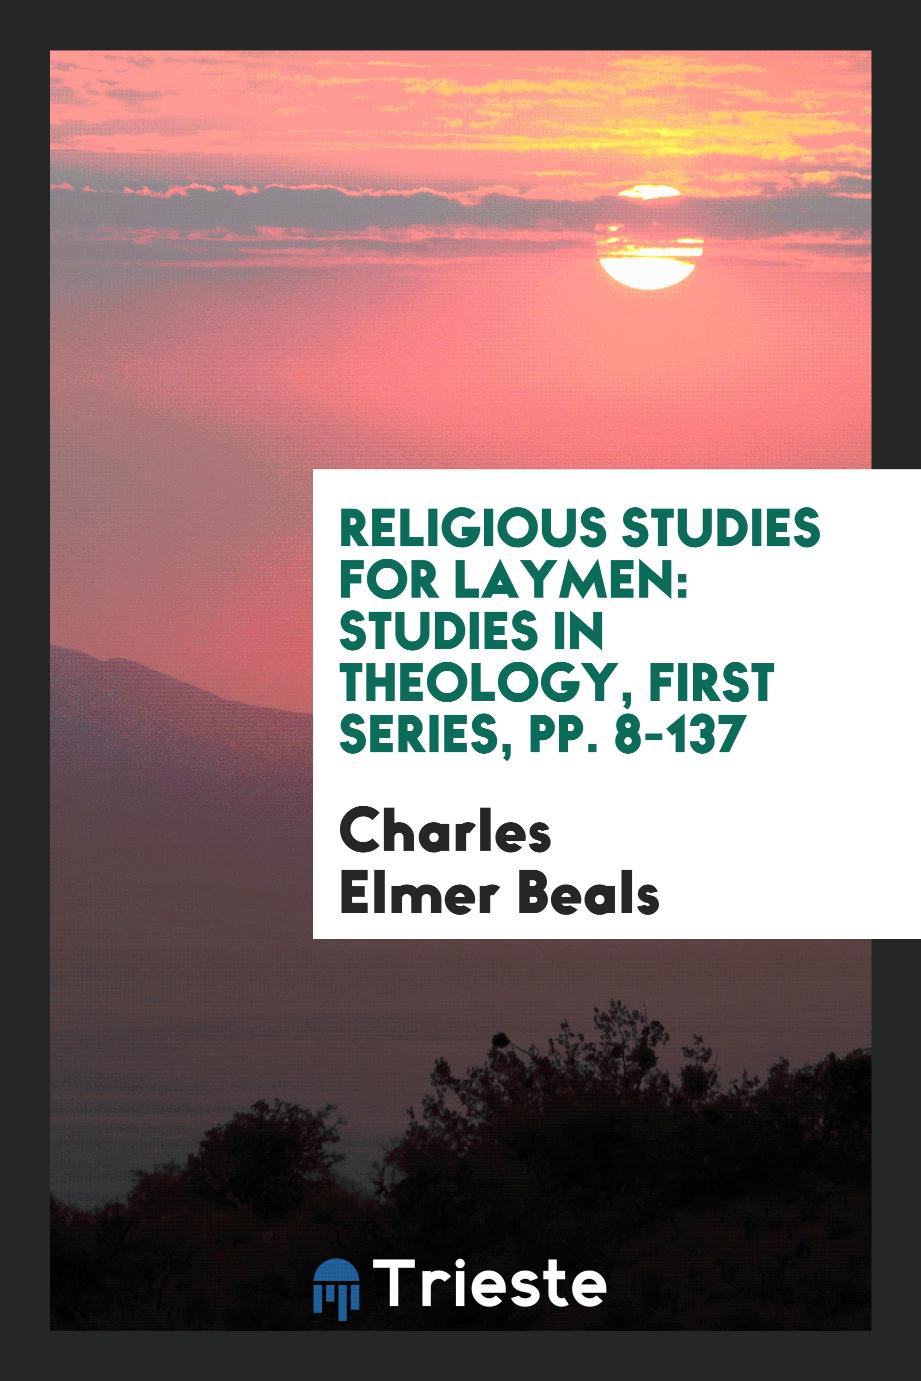 Religious Studies for Laymen: Studies in Theology, First Series, pp. 8-137